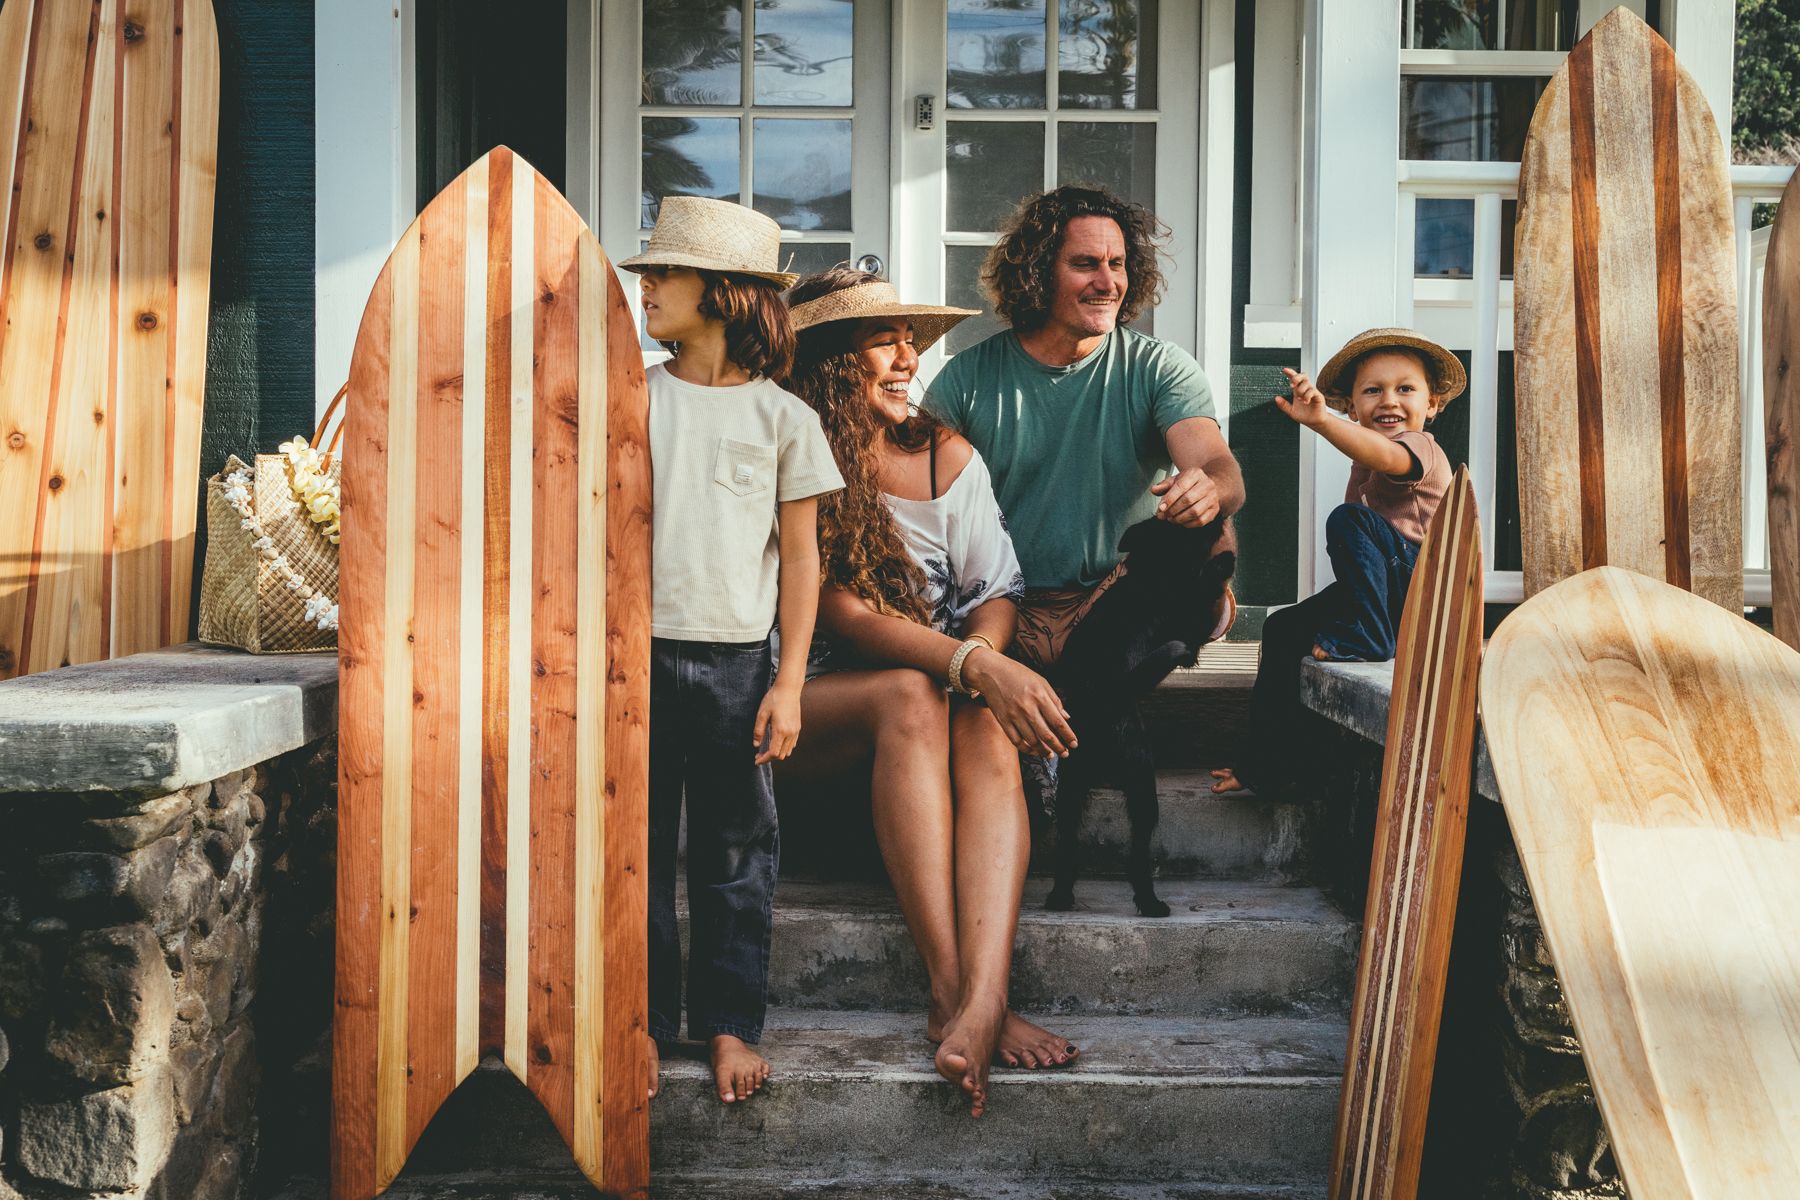 For the Home and Ocean - Lloyd Boards